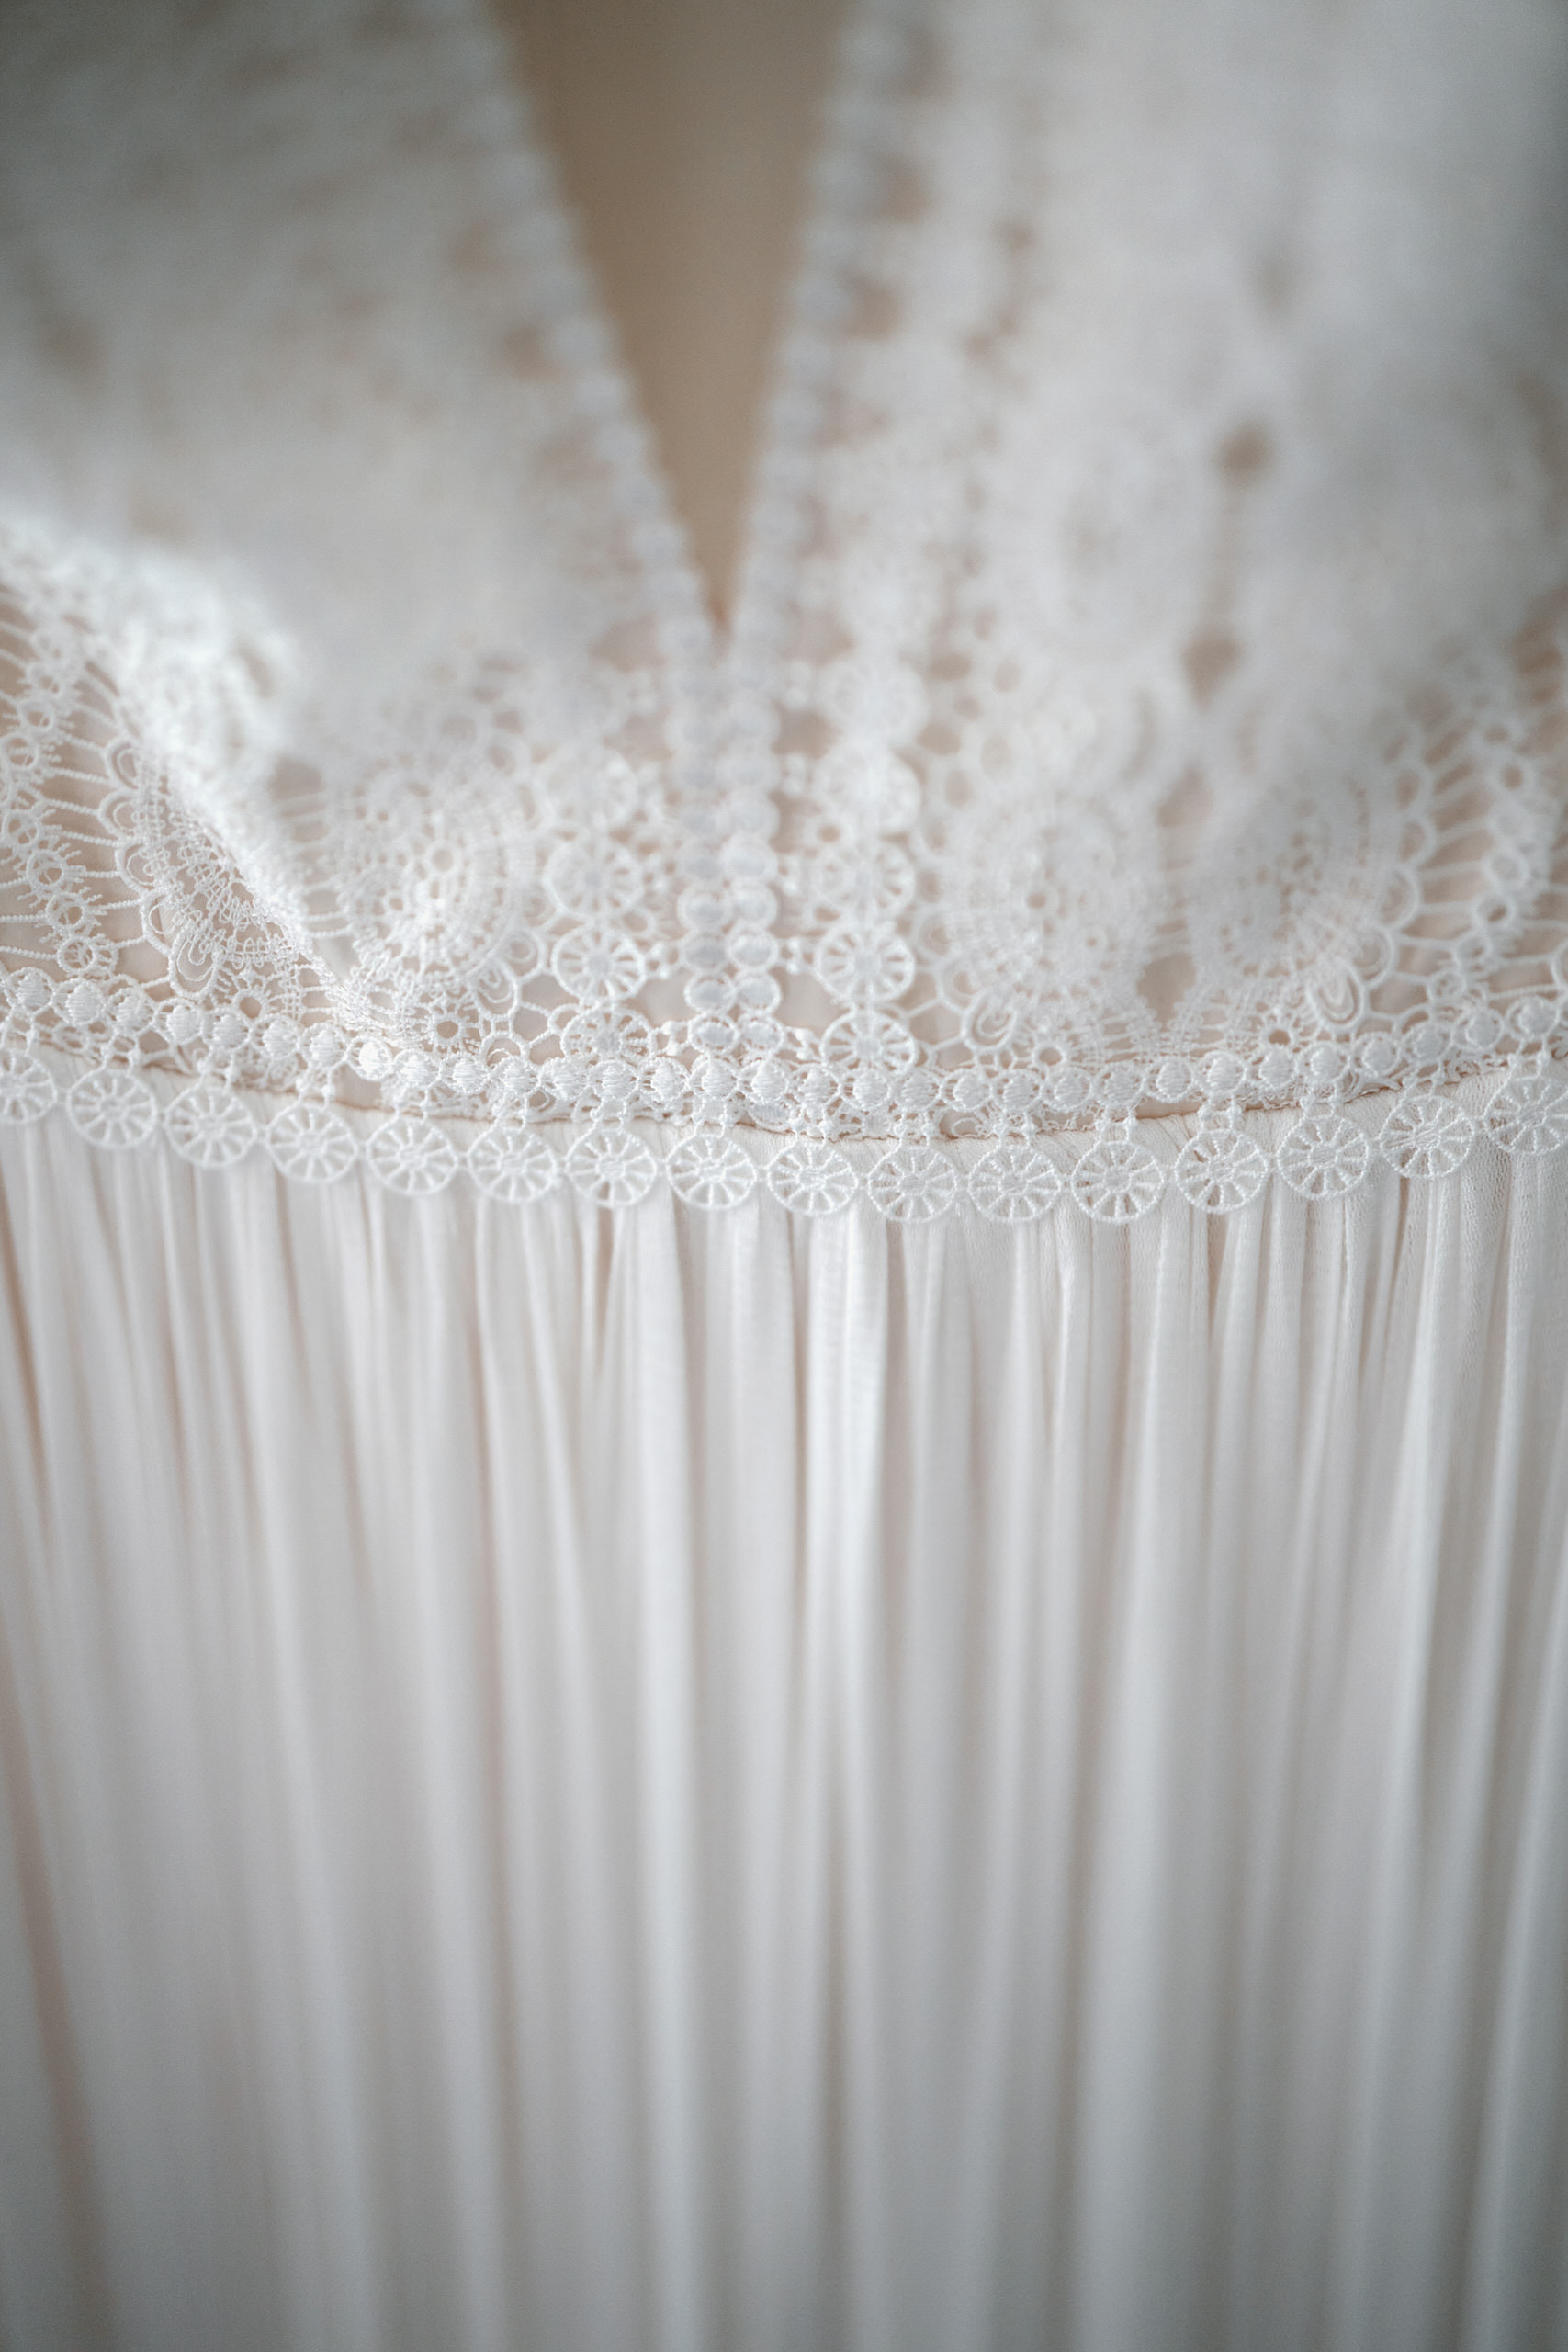 A detailed look at a white lace dress.